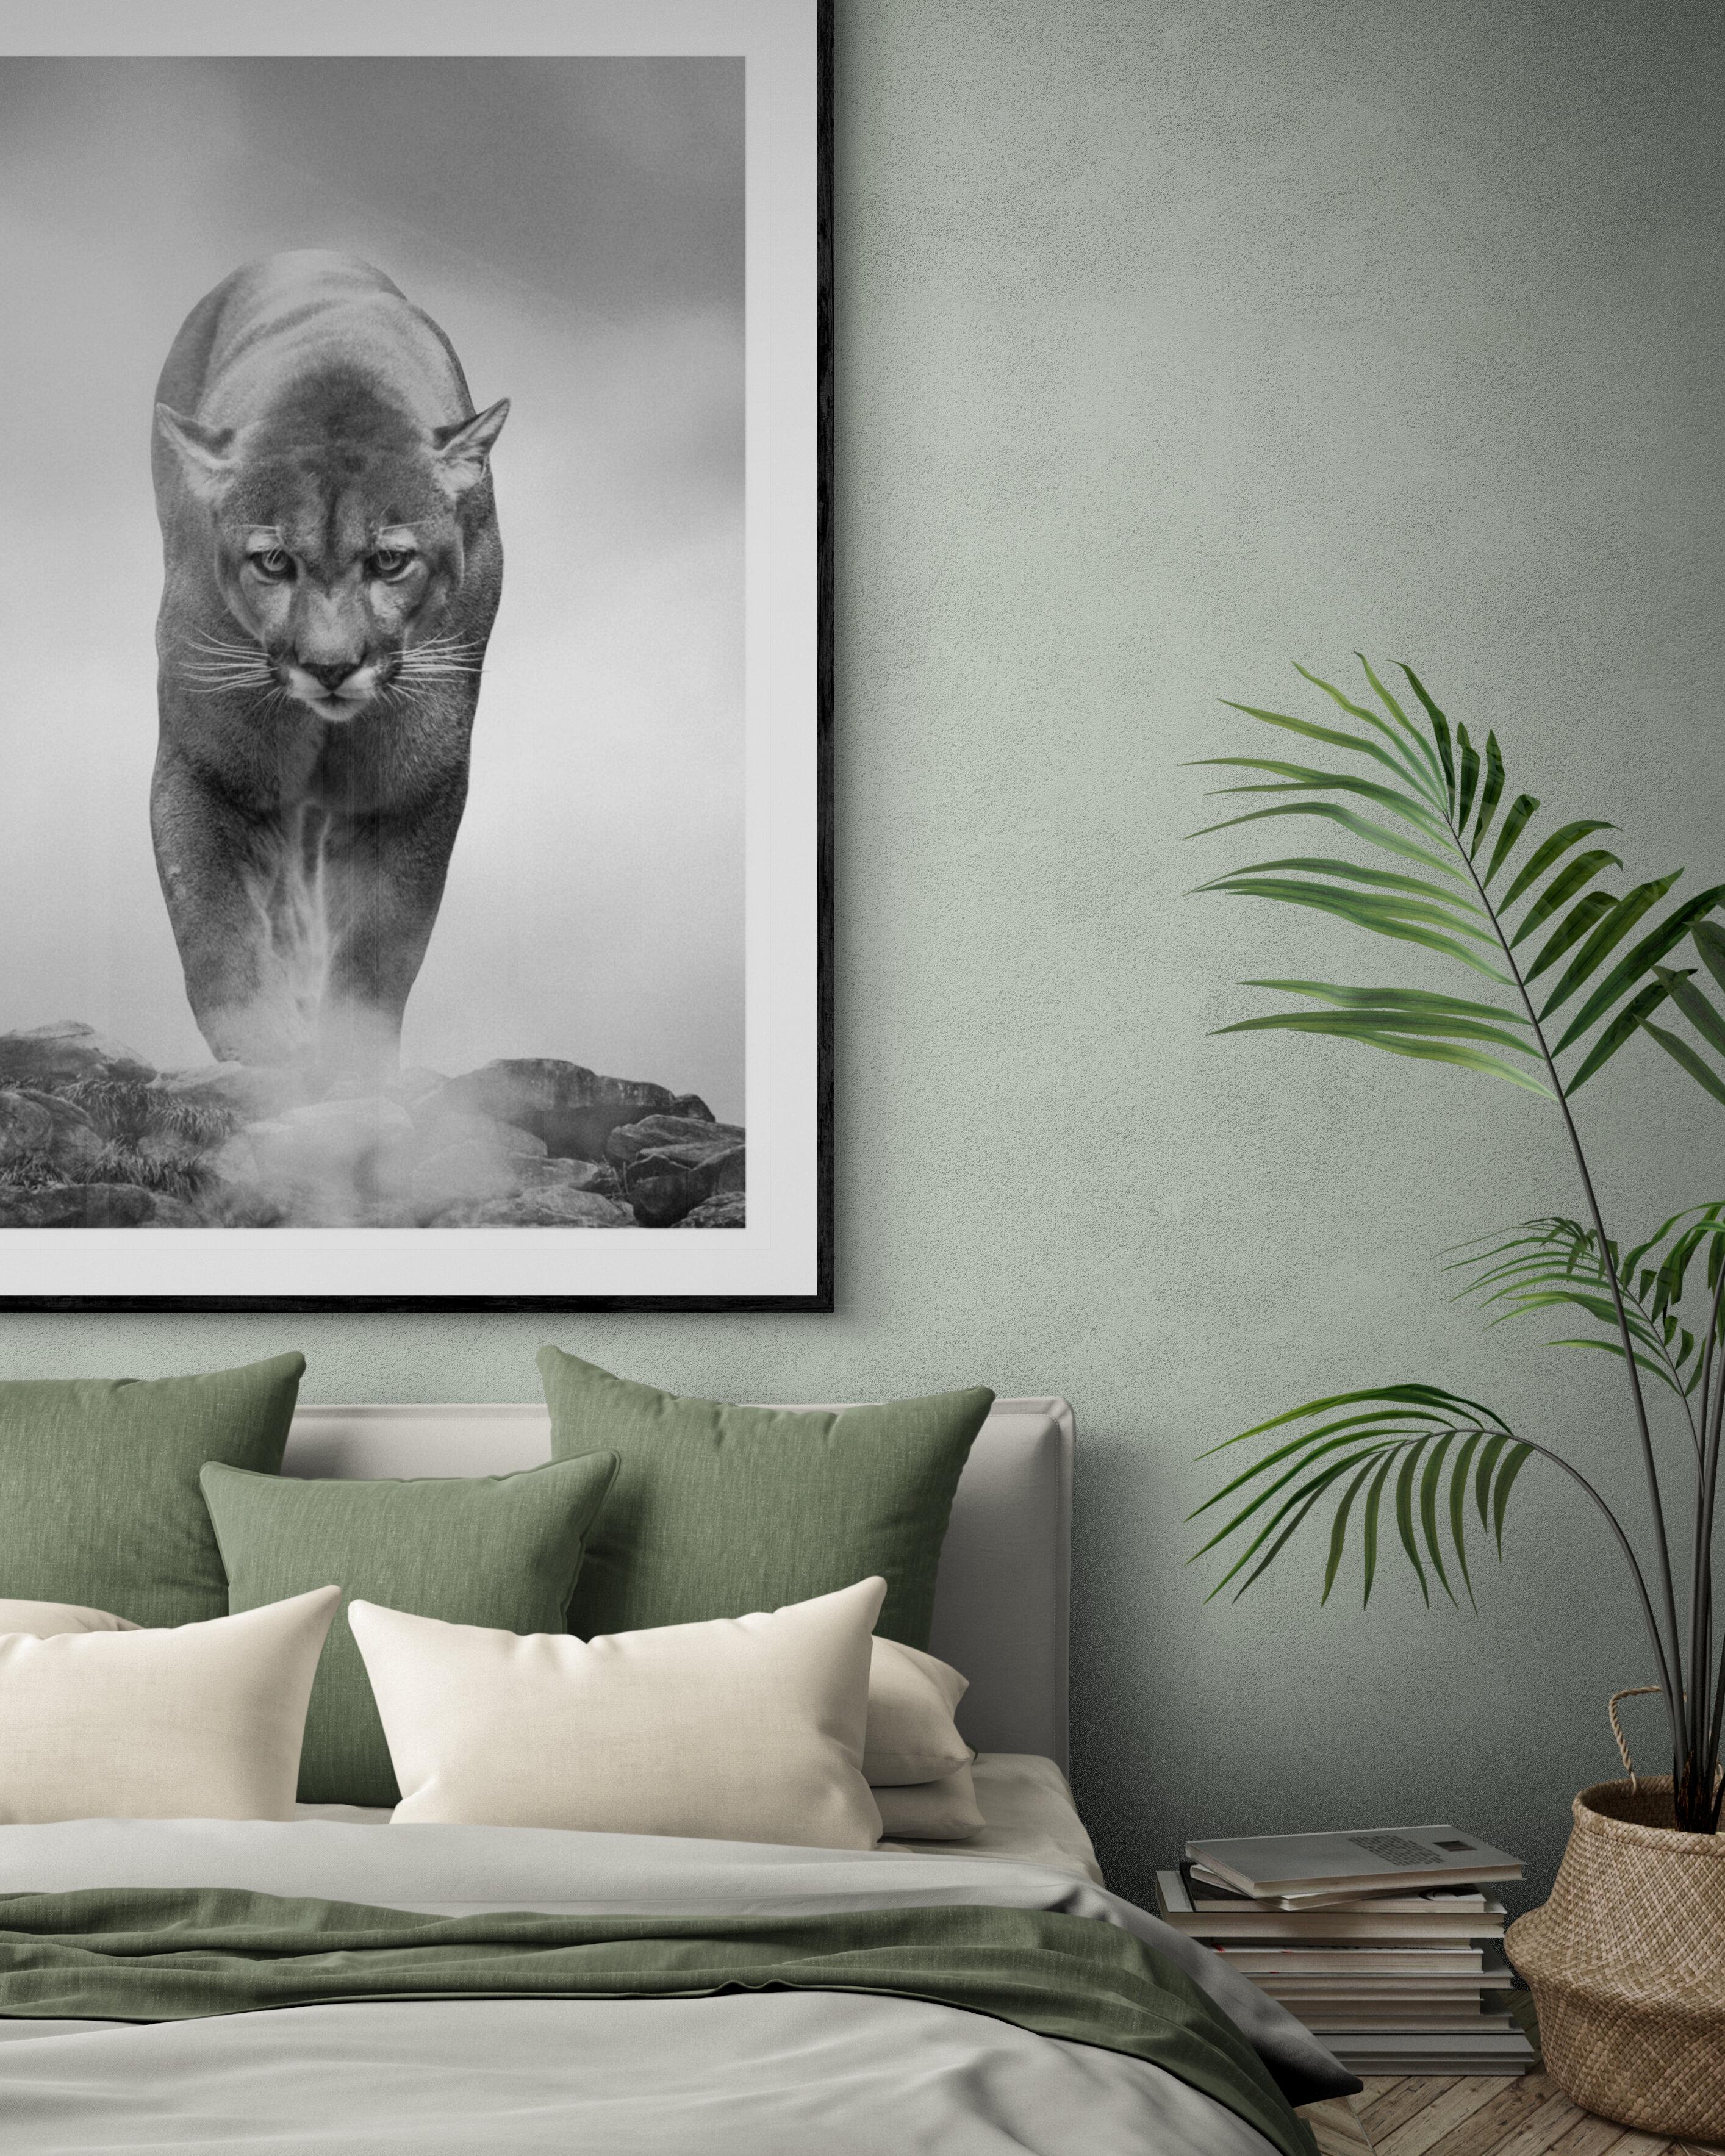 This is a contemporary photograph of a North American Cougar. 
60x40 Edition of 10. Signed by Shane. 
Printed using only archival papers and inks.
UV Coated
Framing available. Inquire for rates. 
FREE SHIPPING WITHIN THE US

Shane Russeck has built